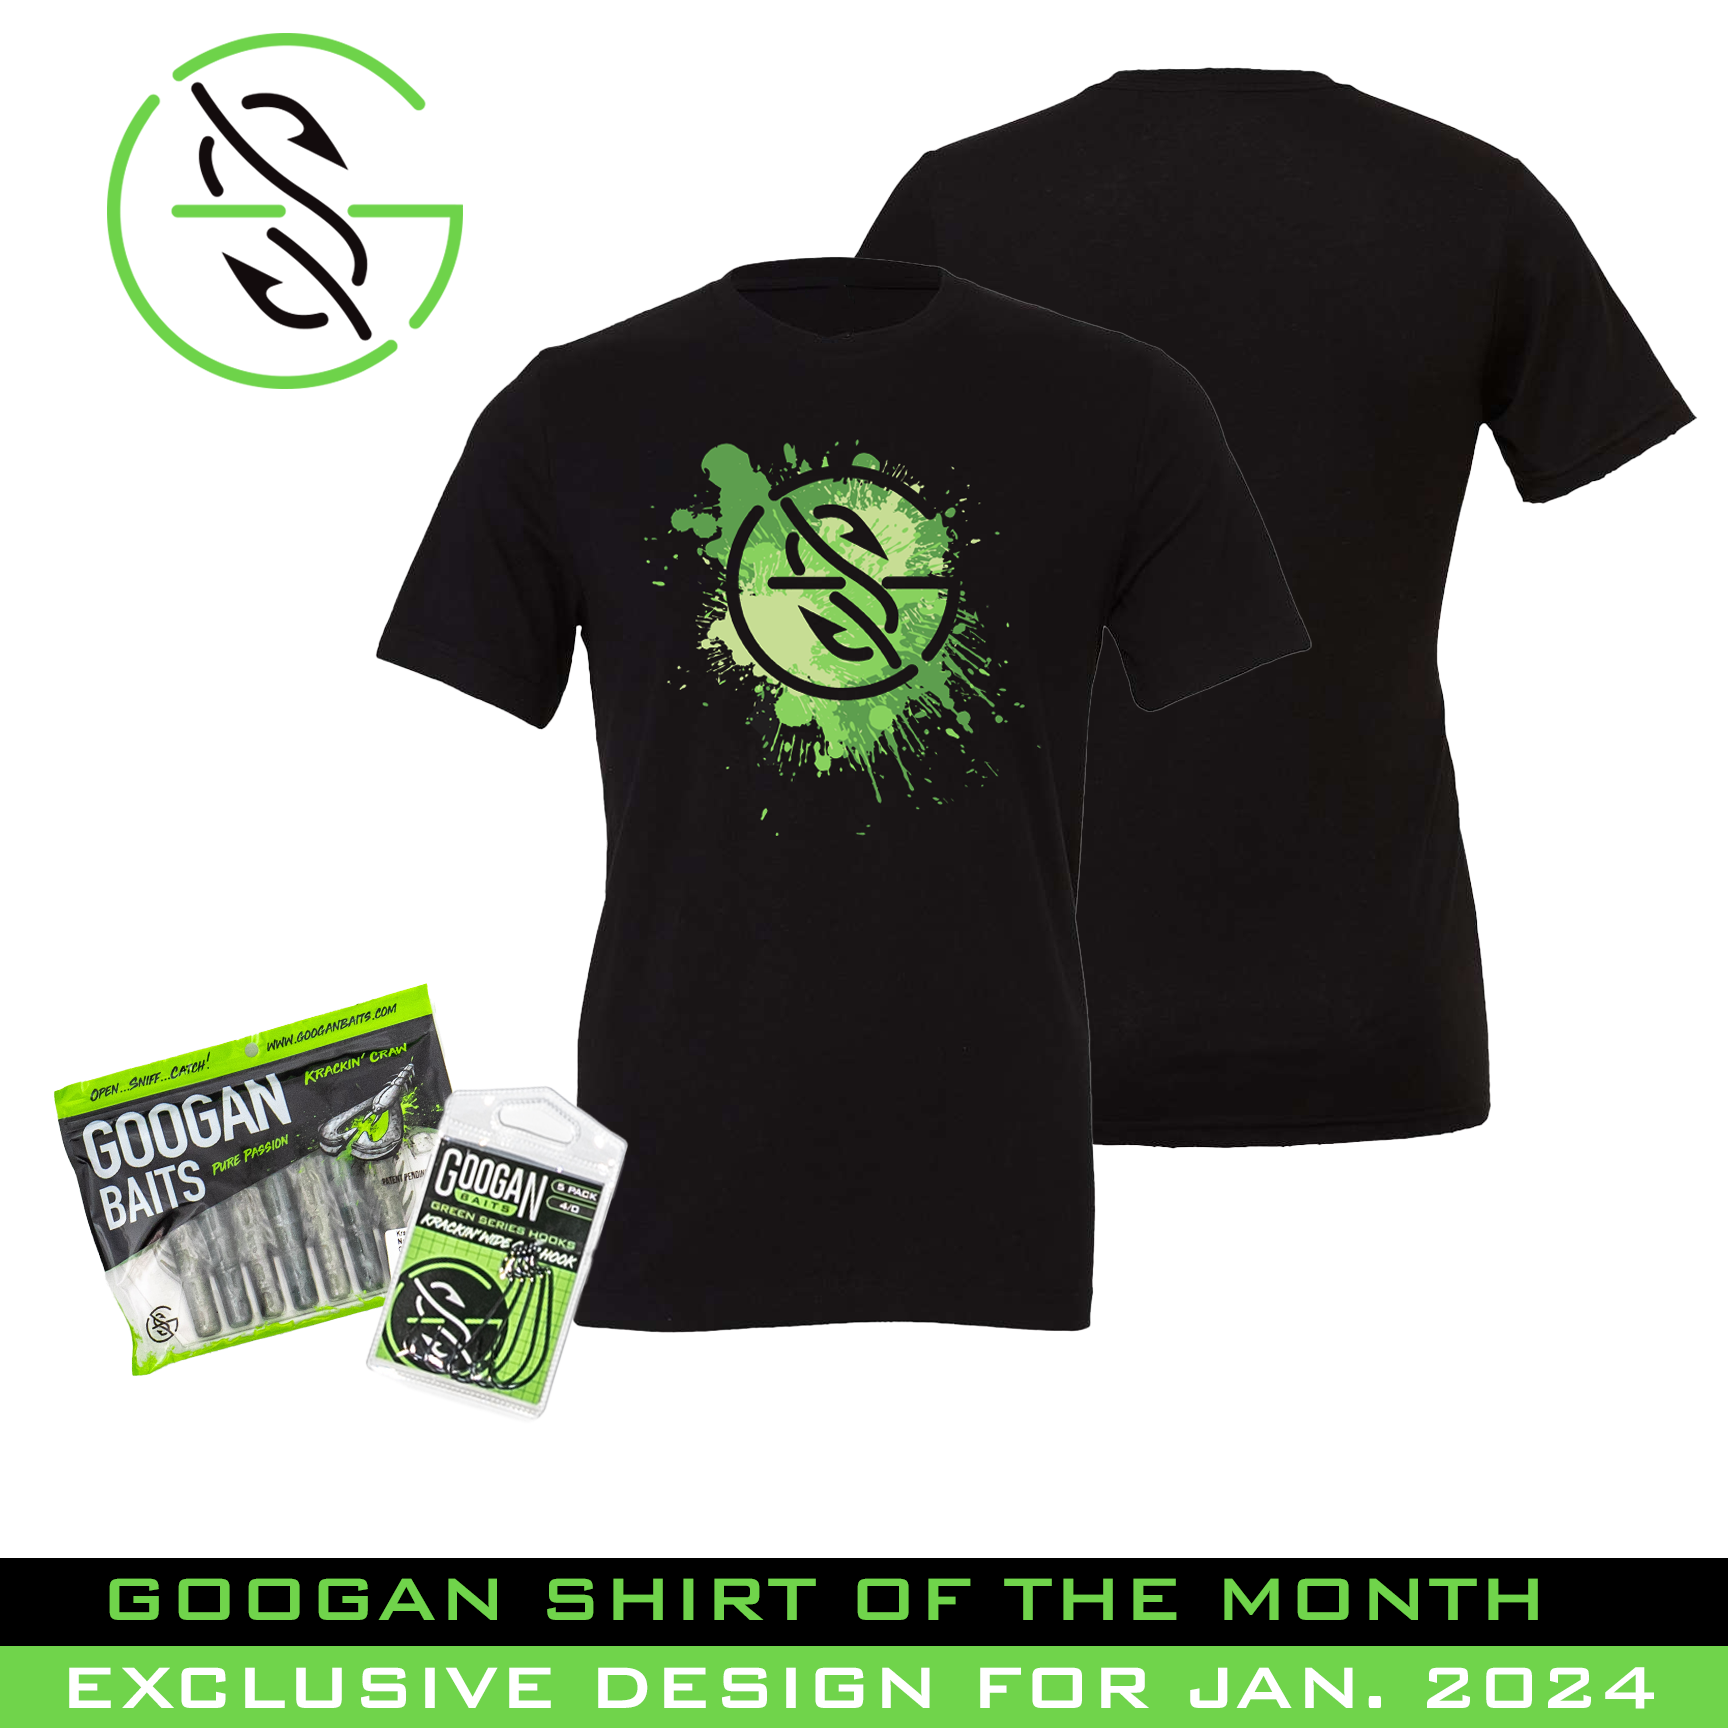 I know Googan Squad is a controversial brand around here, but this